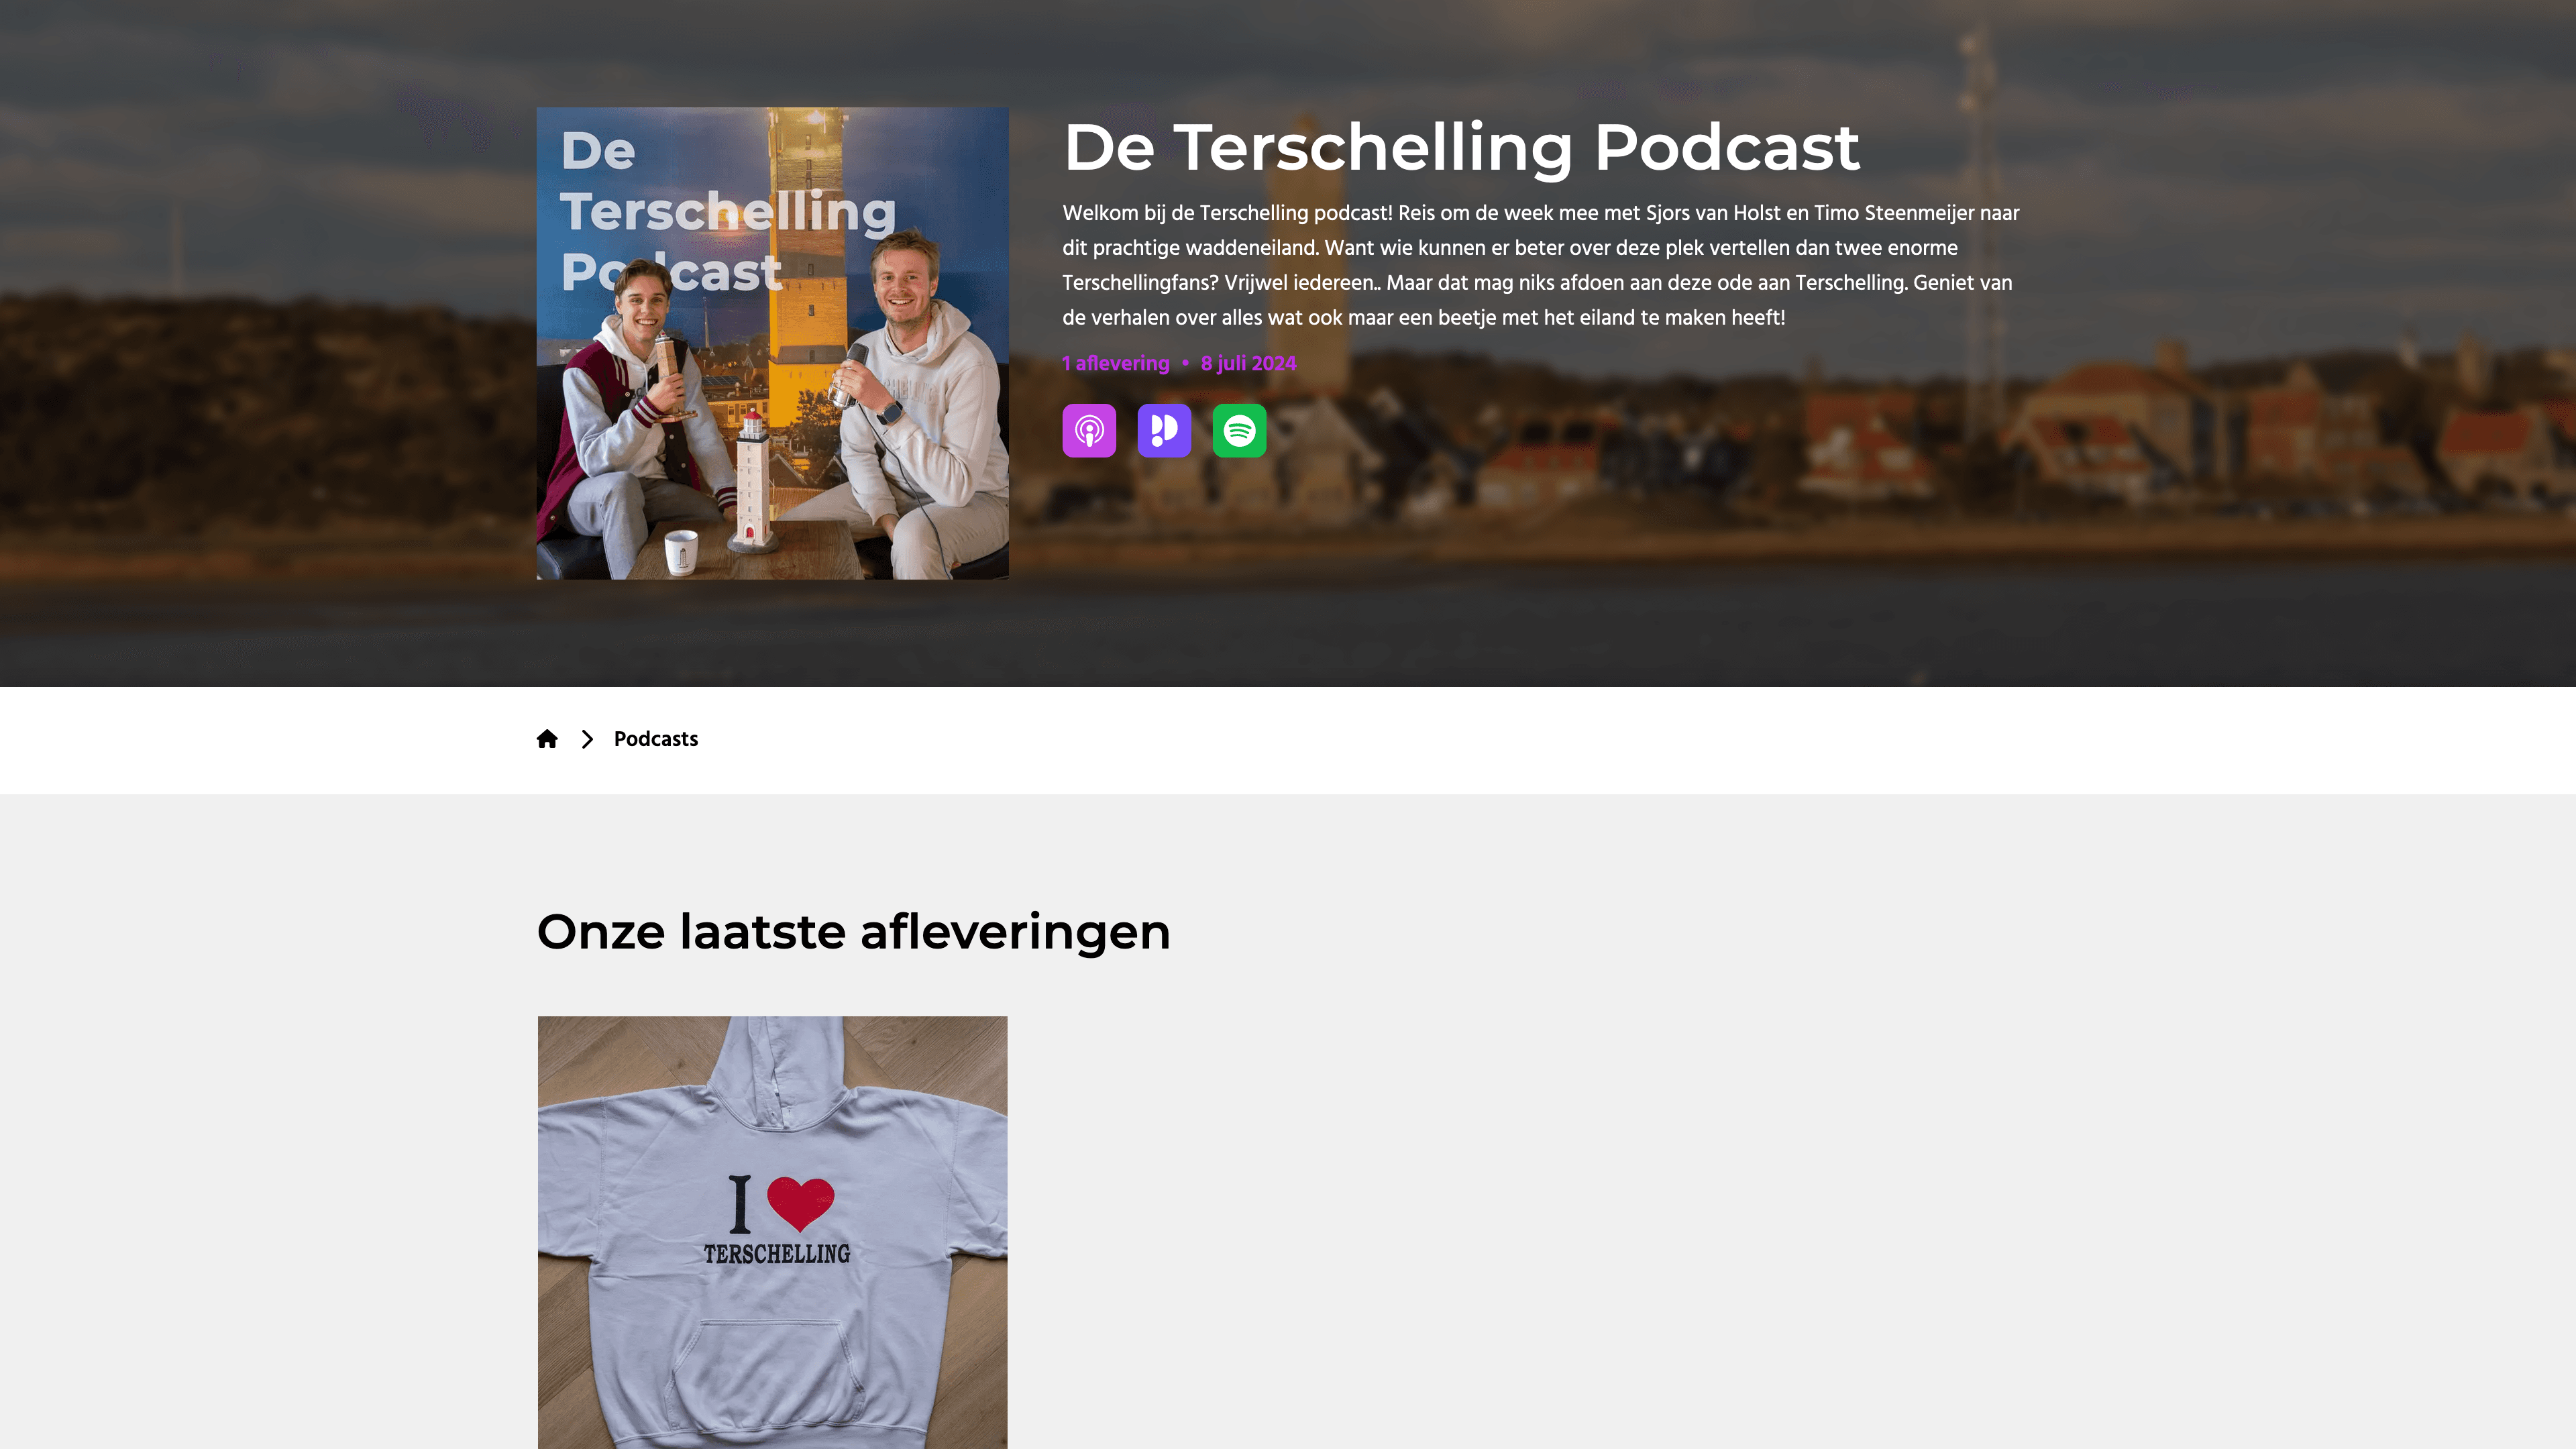 The landing page of De Terschelling Podcast